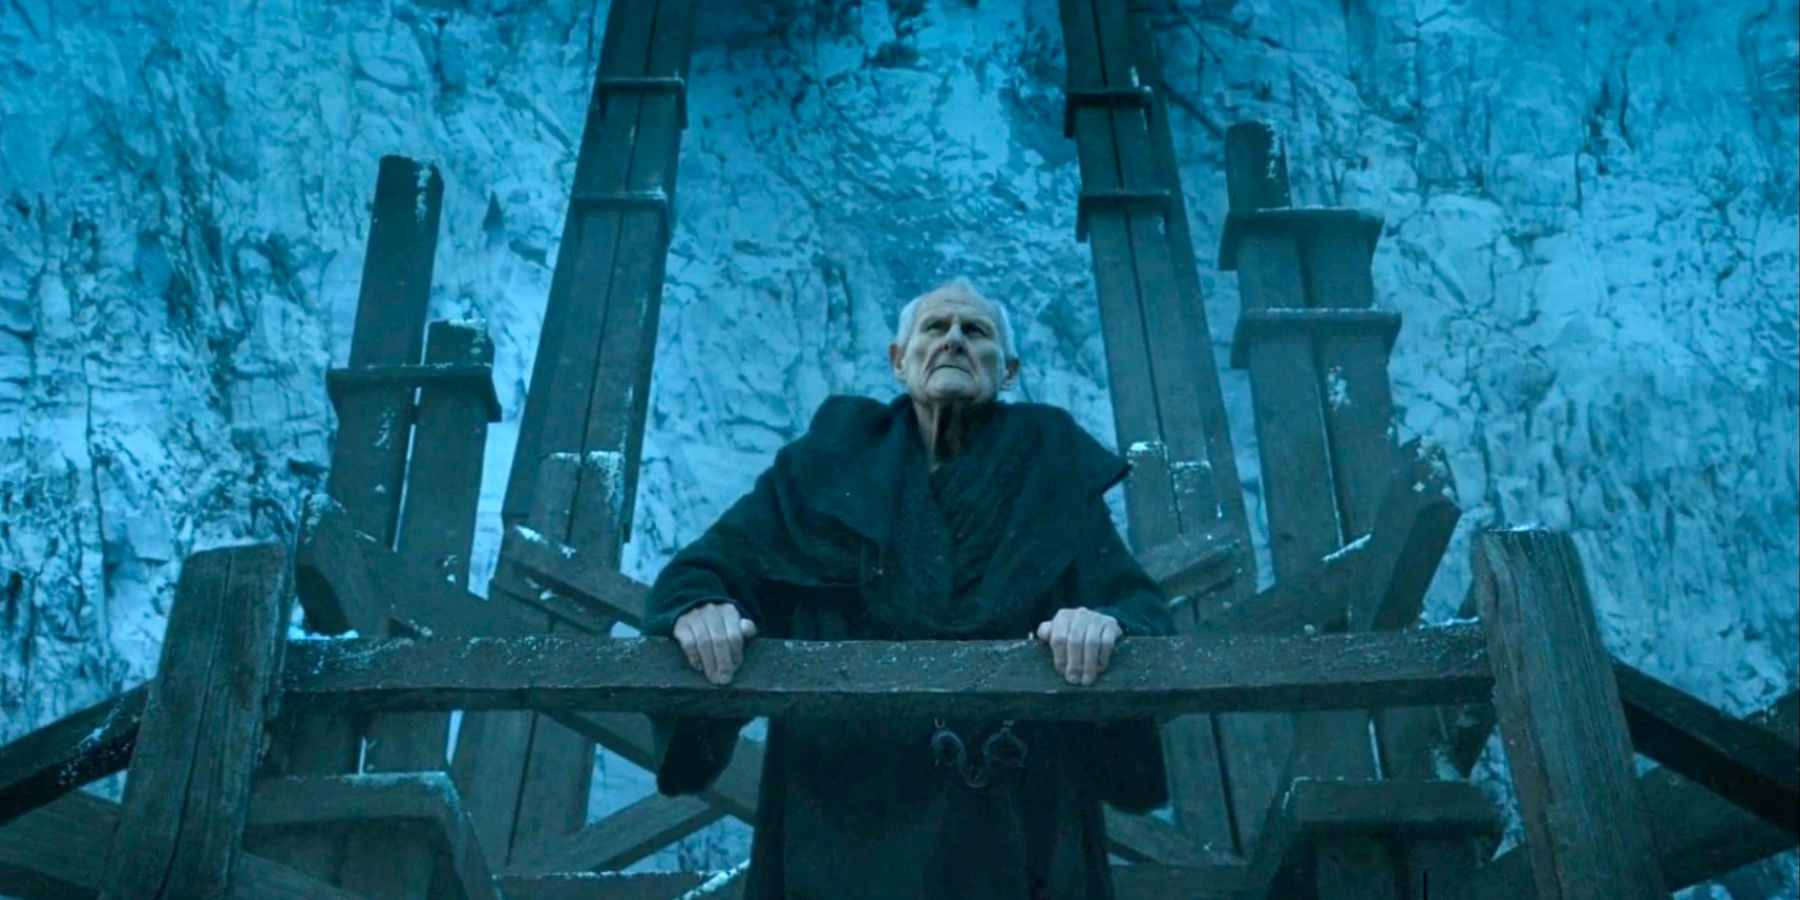 Maester Aemon at the Wall in Game of Thrones.